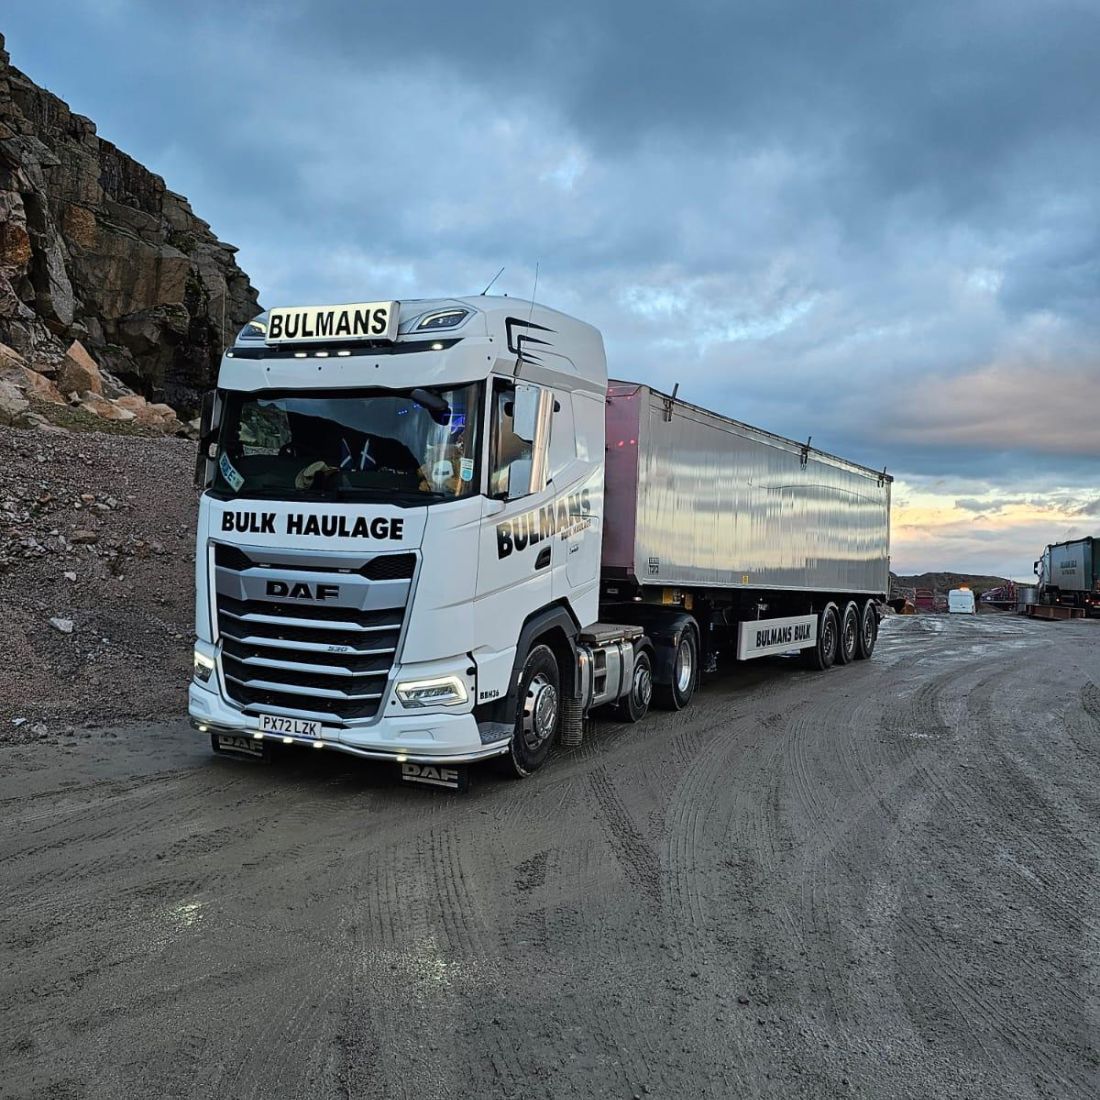 A Bulmans Bulk Haulage white DAF truck, parked in a quarry with a dramatic cloudy sky overhead.